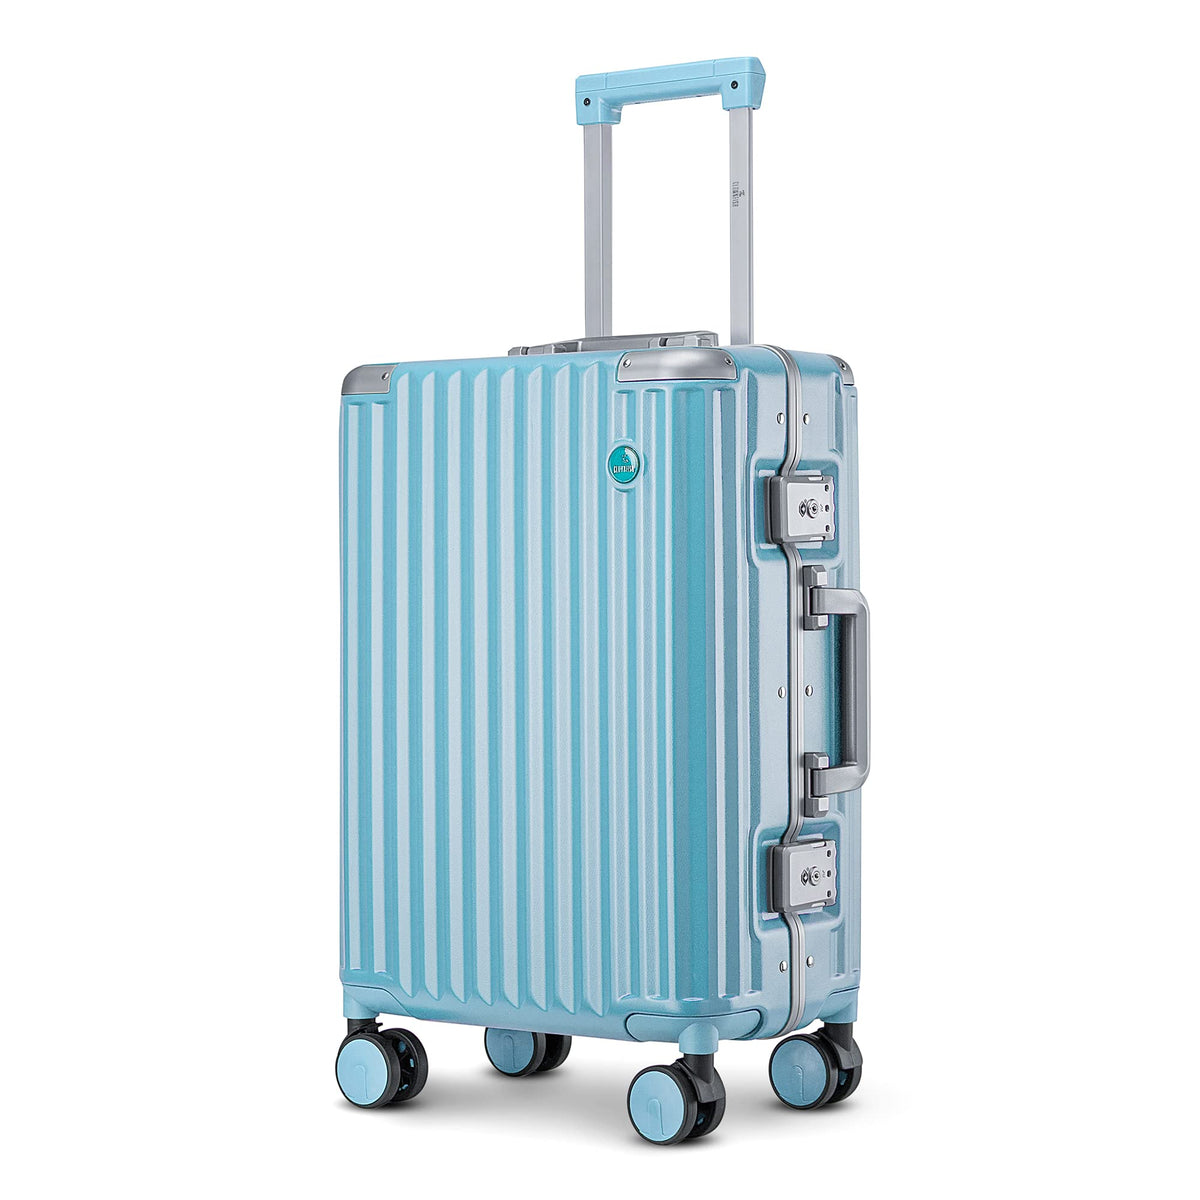 THE CLOWNFISH Stark Series Luggage Polycarbonate Hard Case Suitcase Eight Wheel Trolley Bag with Double TSA Locks- Sky Blue (Small Size, 57 cm-22 inch)